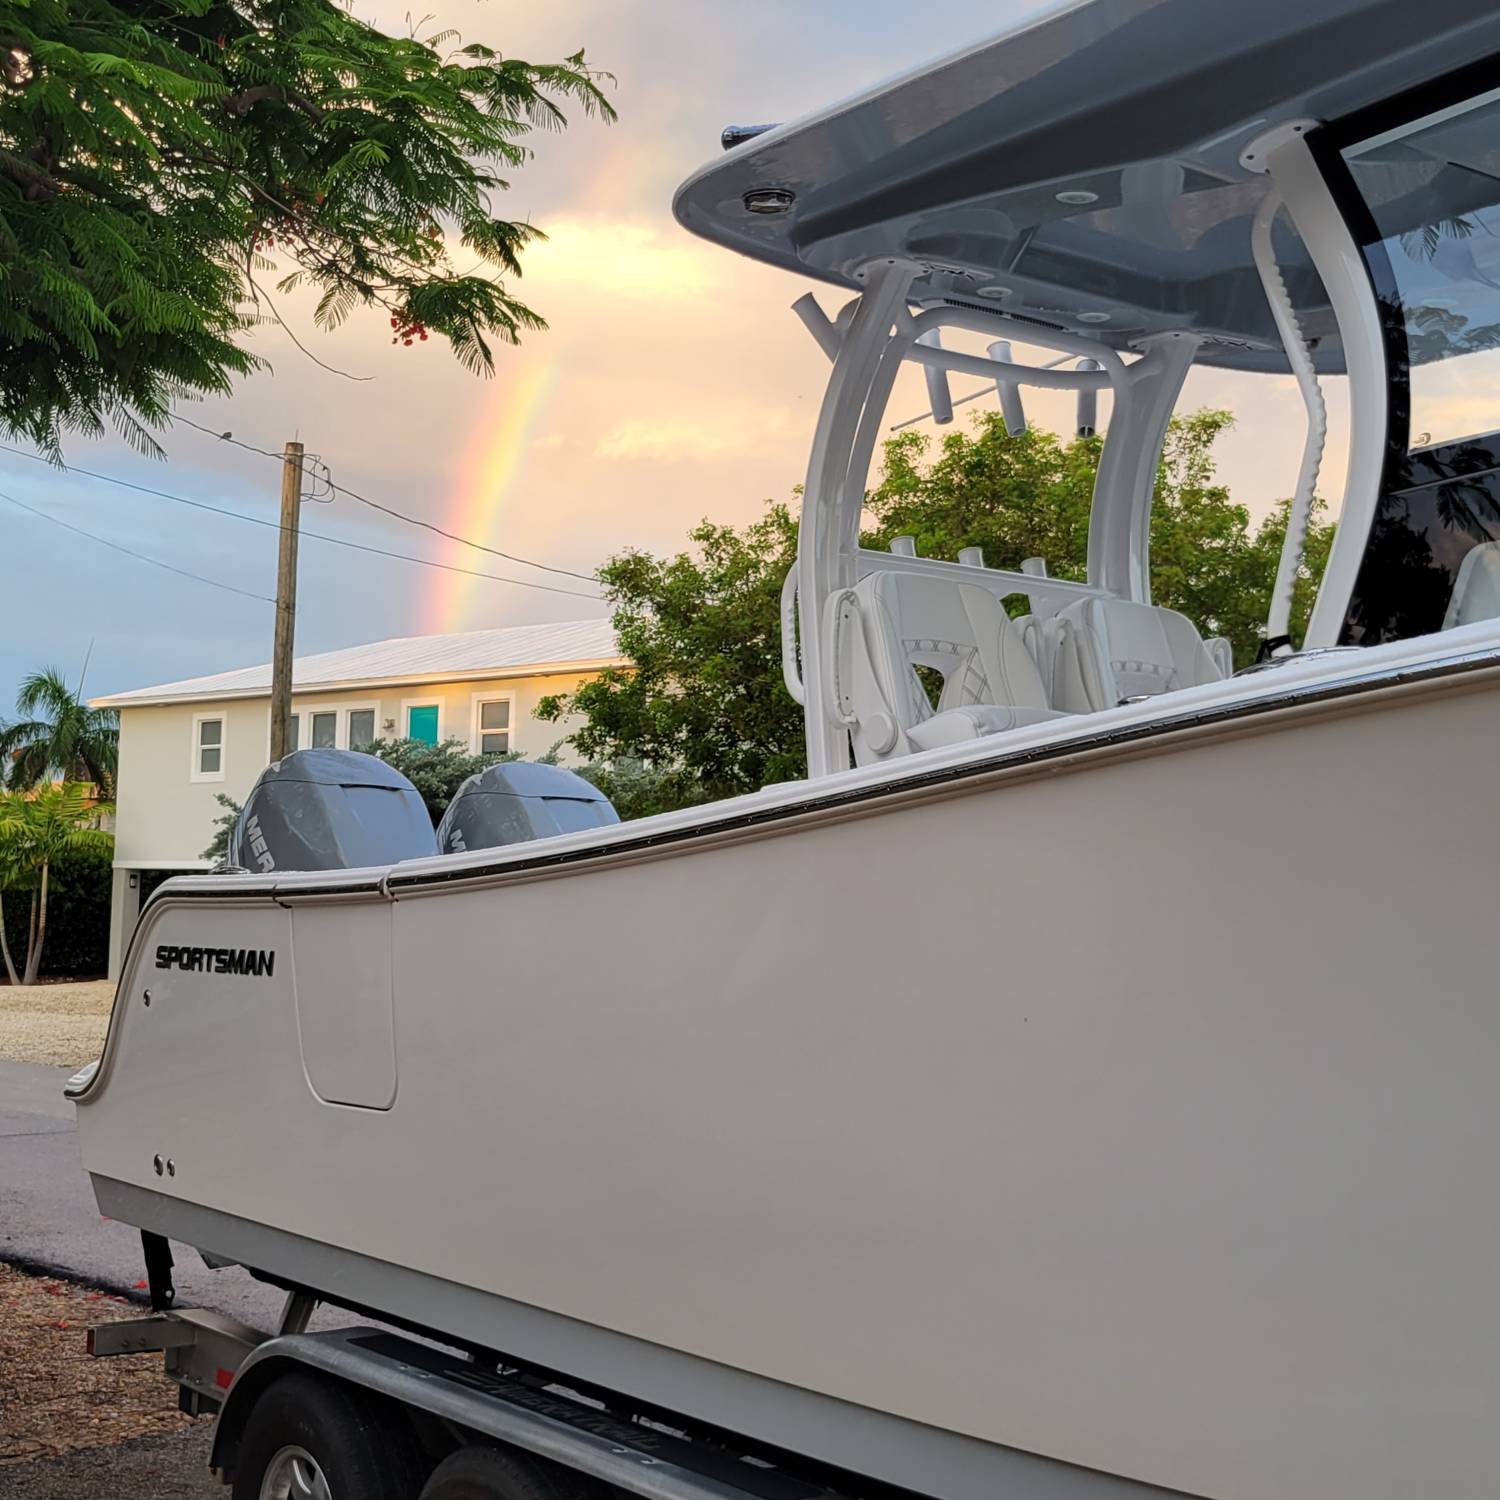 Title: The pot of gold at the end of the rainbow! - On board their Sportsman Open 302 Center Console - Location: Marathon, Fl. Participating in the Photo Contest #SportsmanJuly